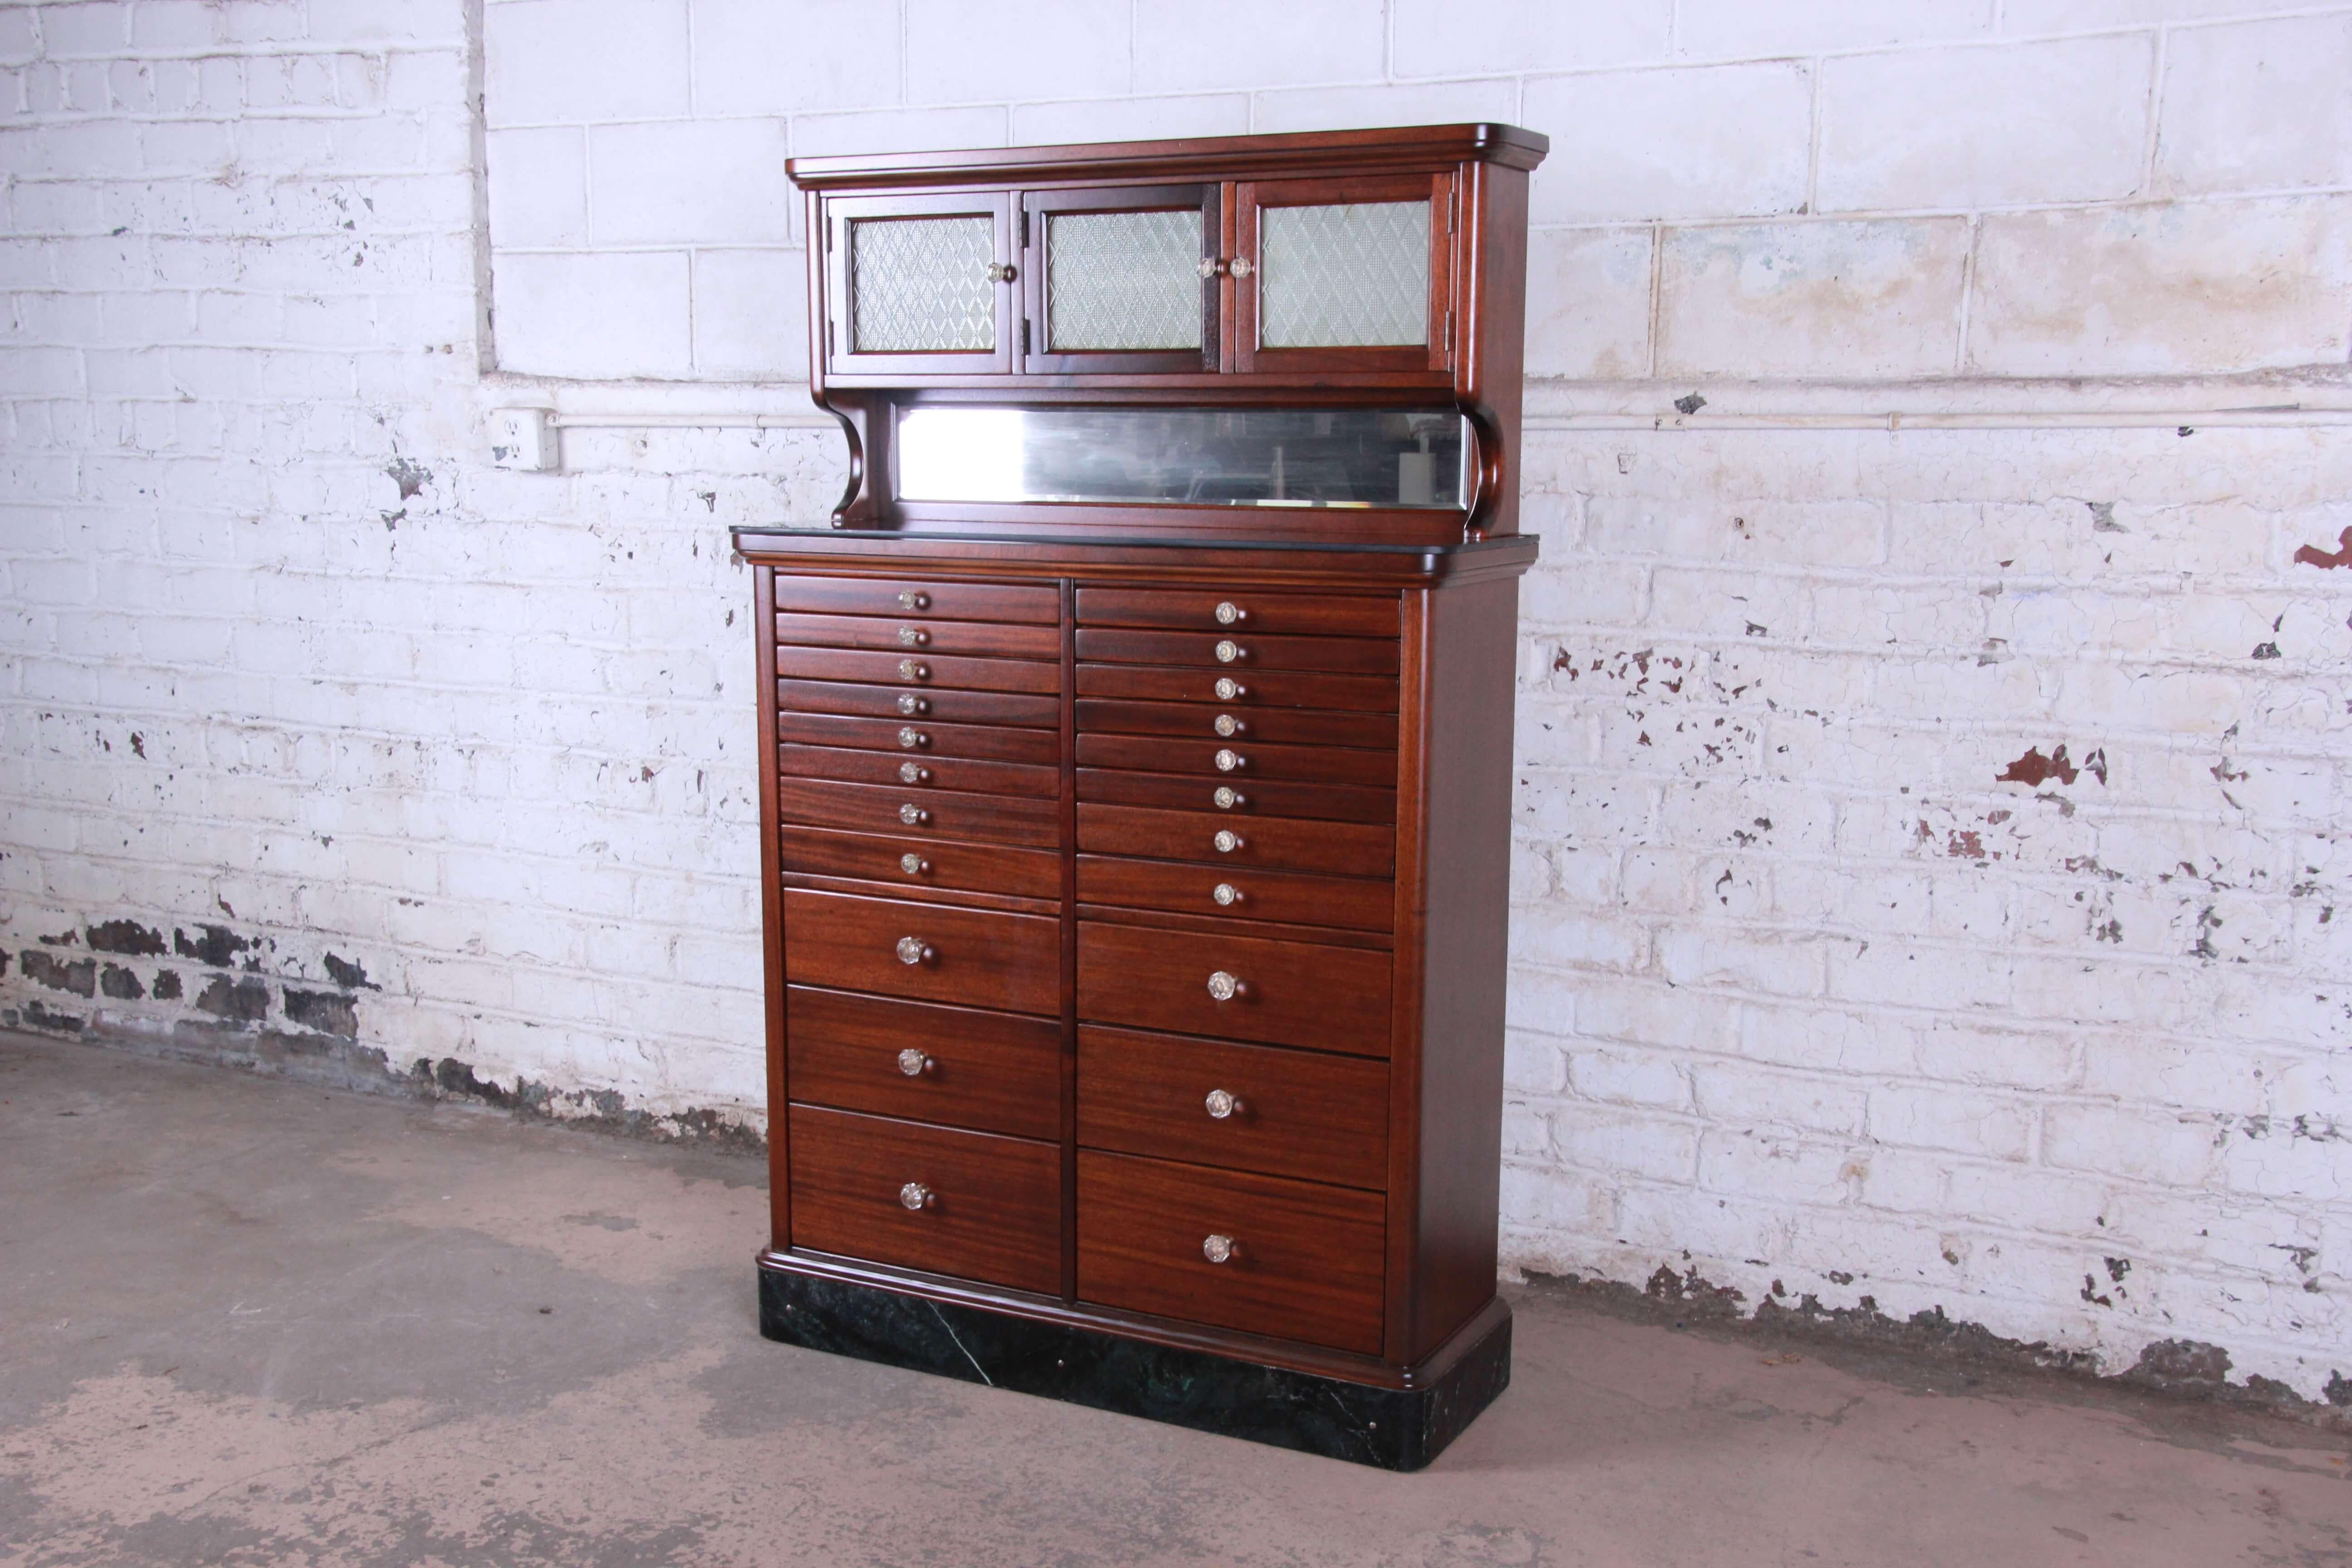 Offering a truly unique and extraordinary antique mahogany marble base dental cabinet manufactured in 1929. The piece features 22 drawers with 46 ceramic dental trays within the piece. It features a hidden locking system with a hidden level in a